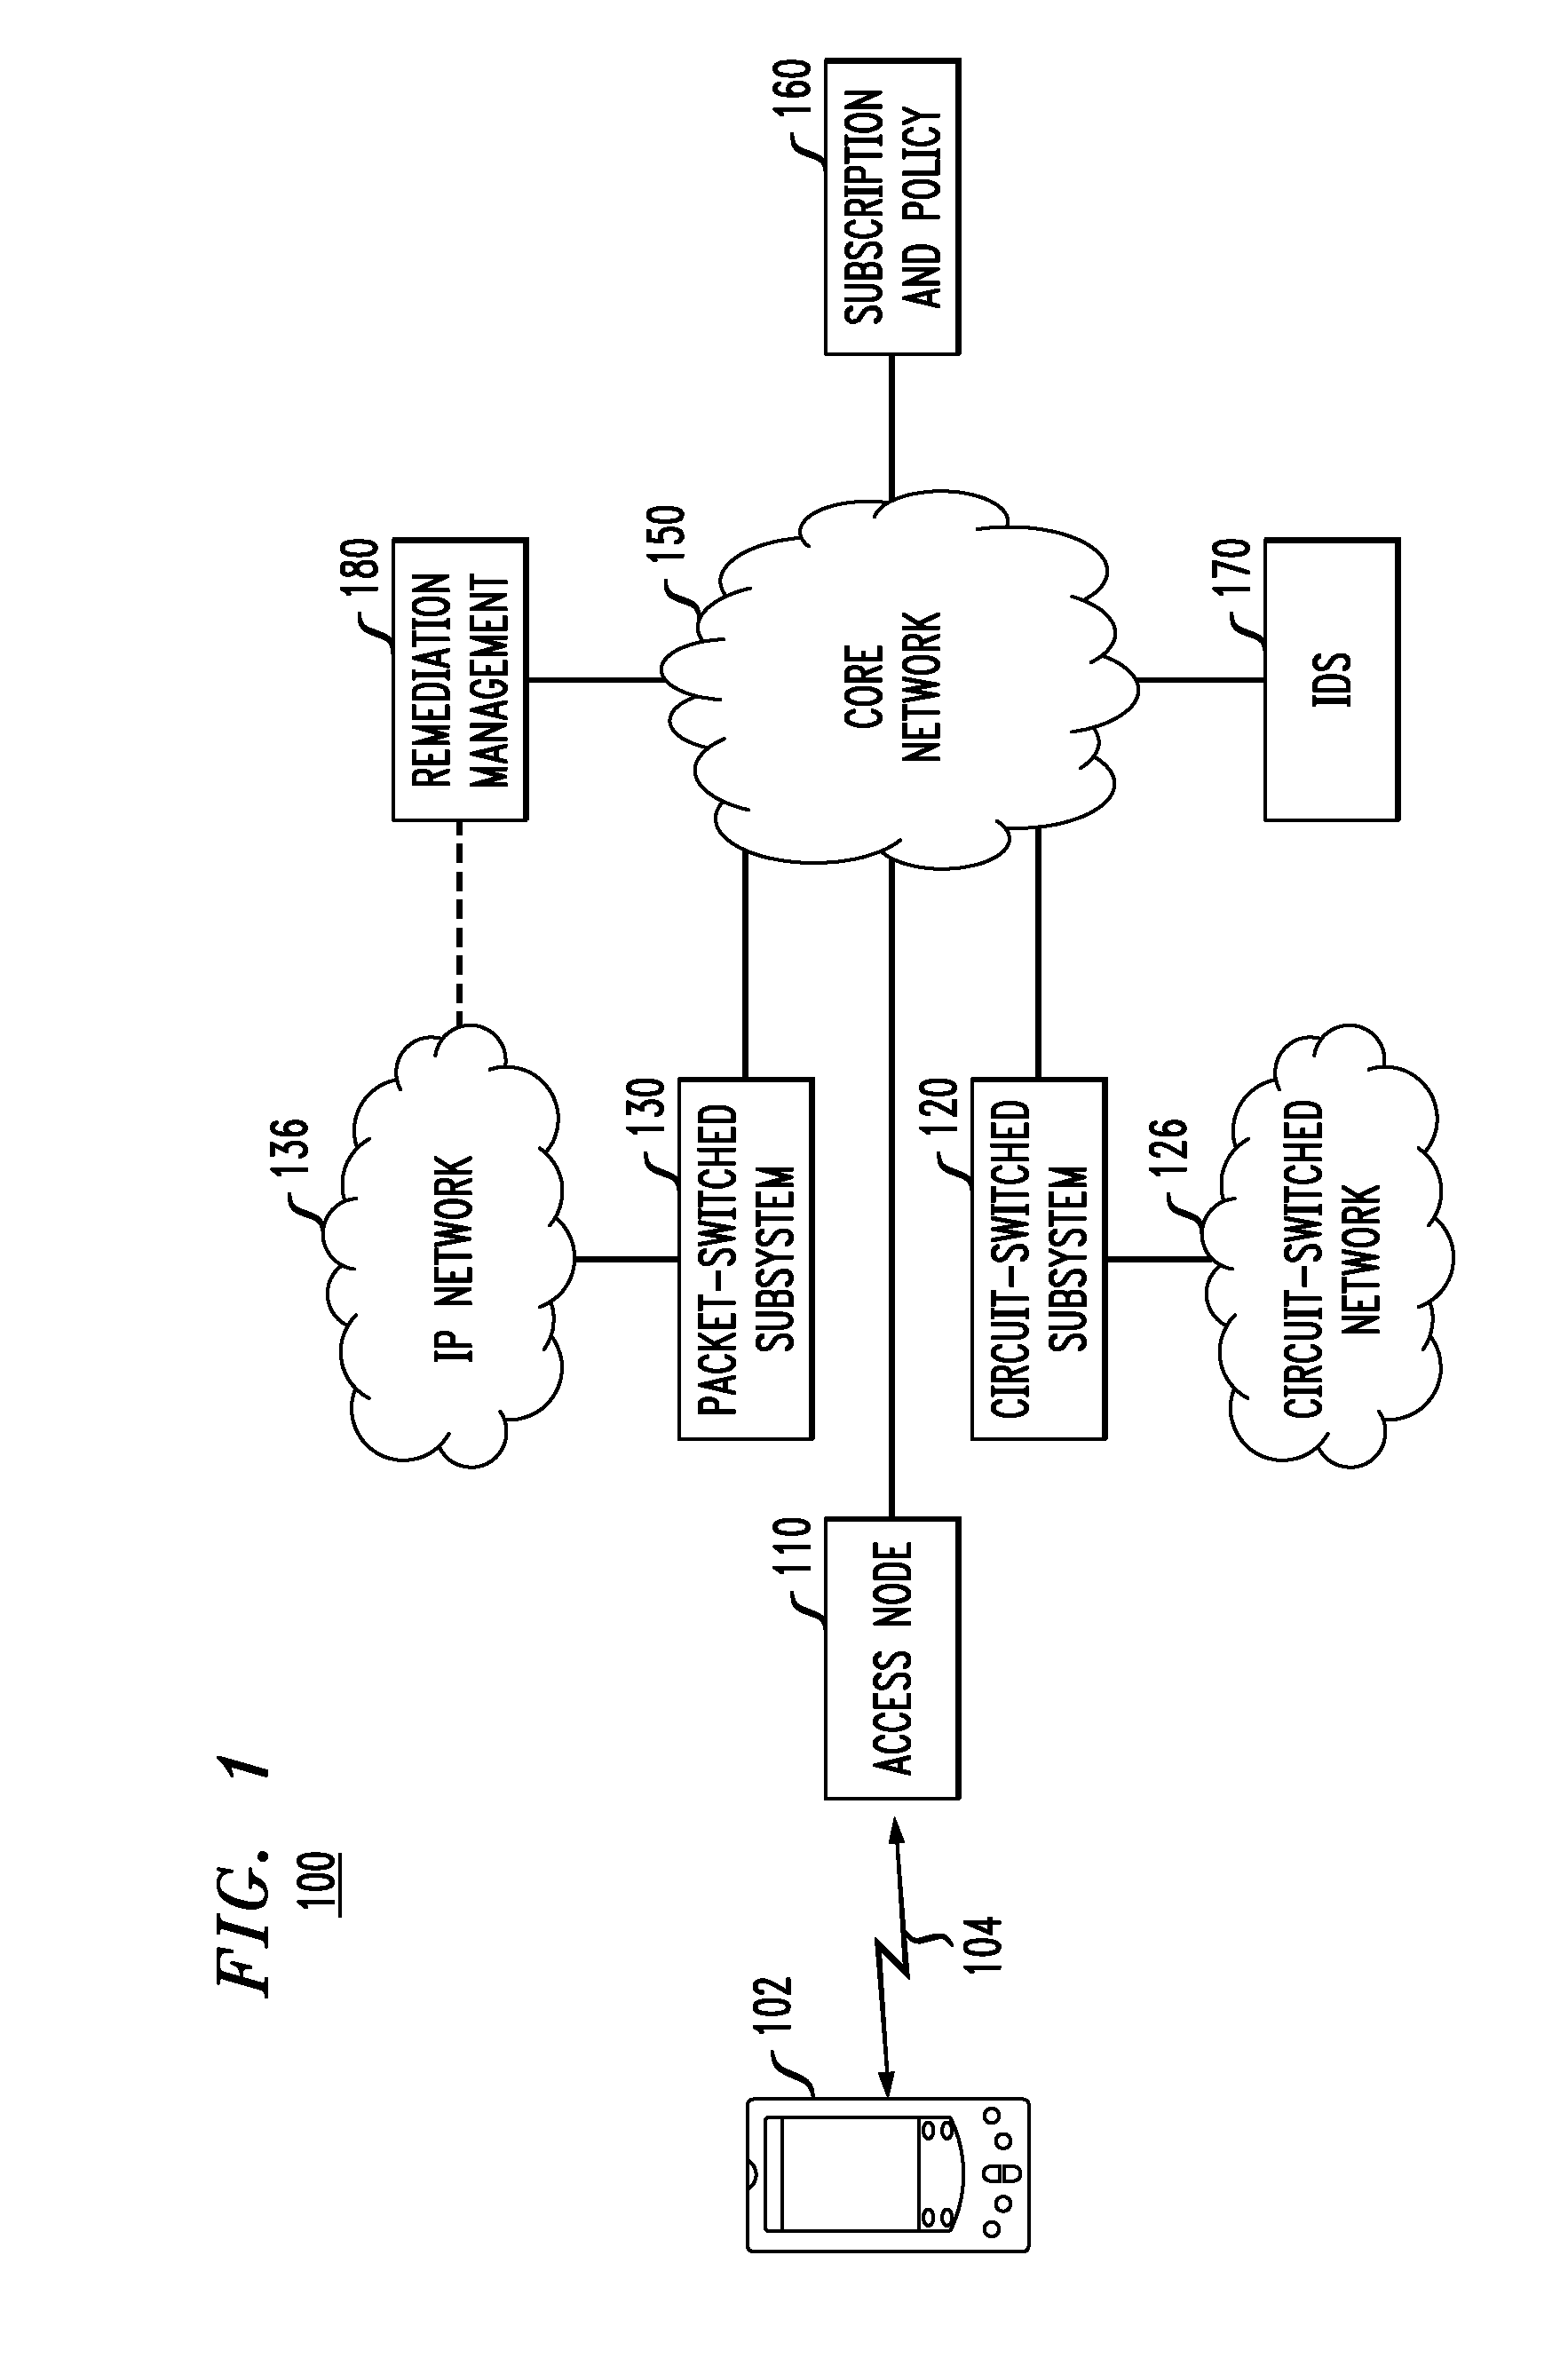 Treatment of malicious devices in a mobile-communications network